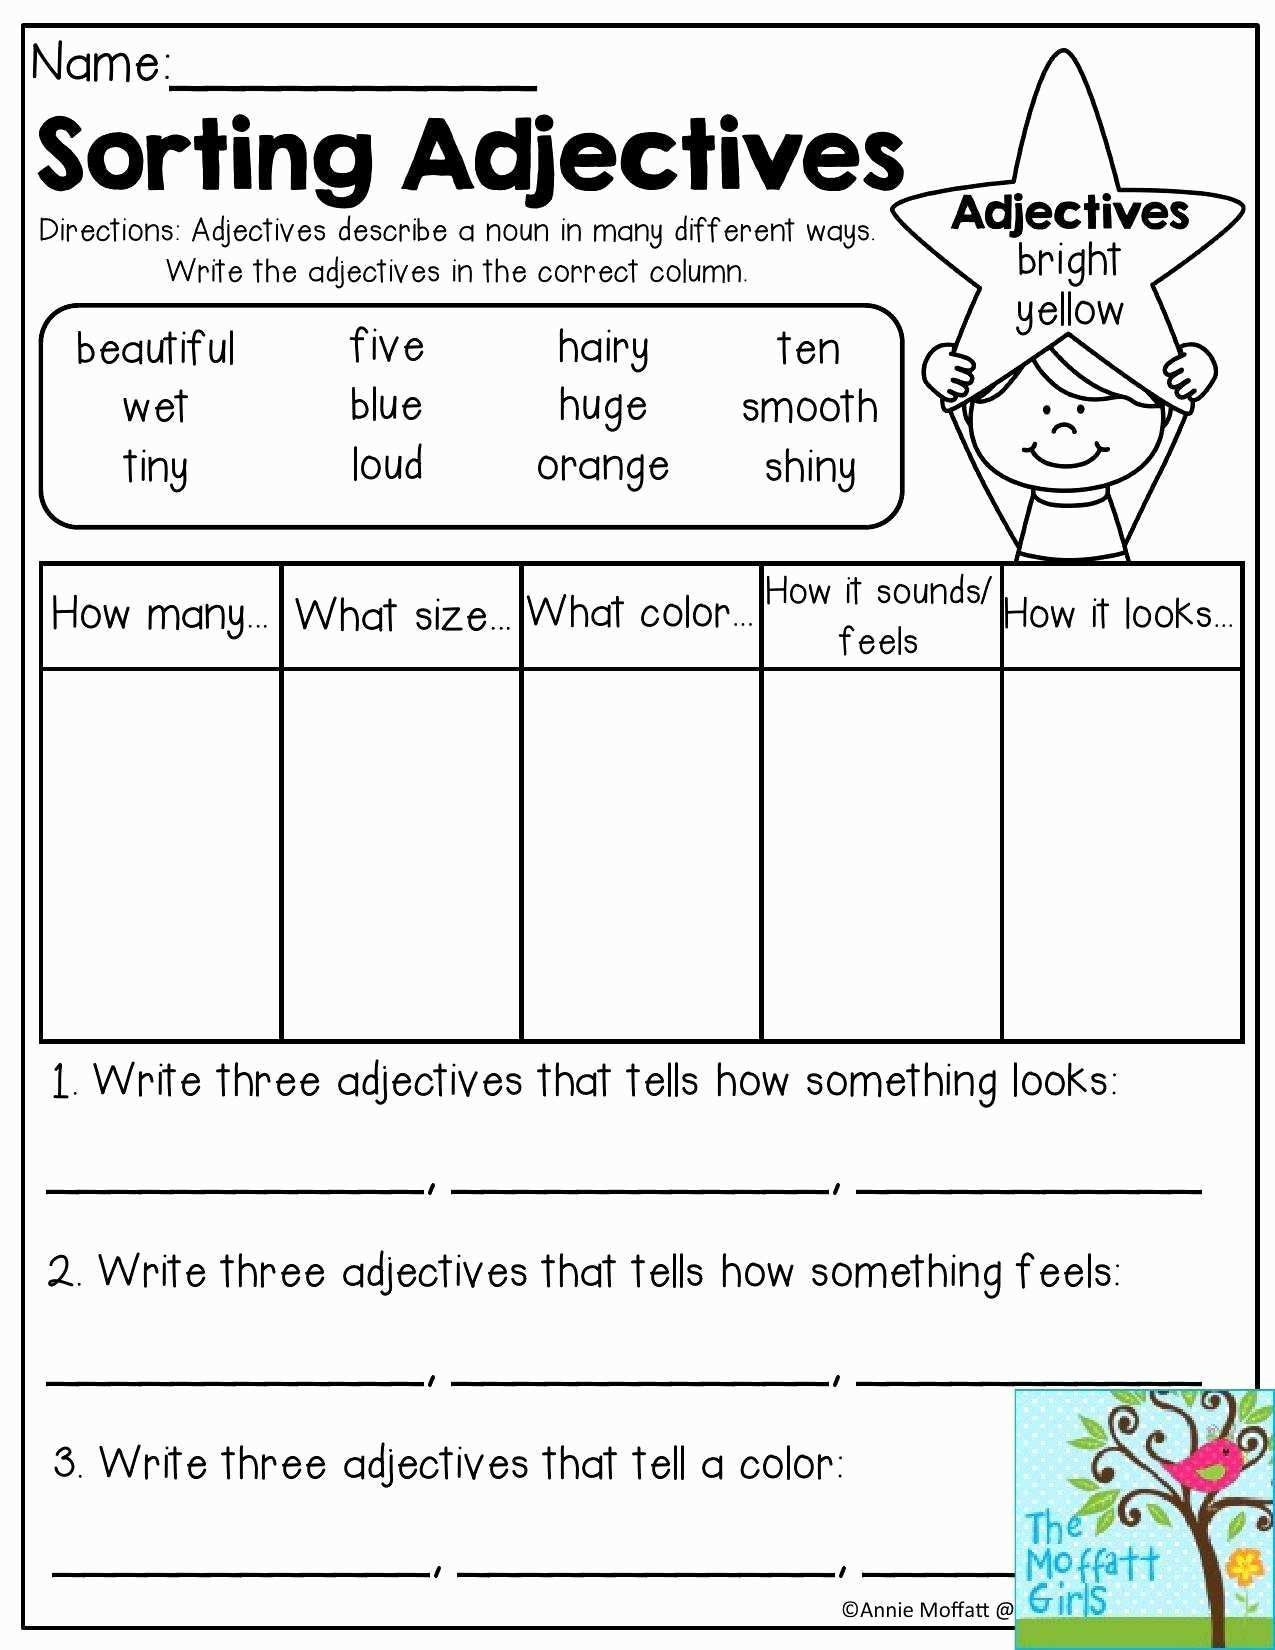 Agreement Of Adjectives Spanish Worksheet Db excel